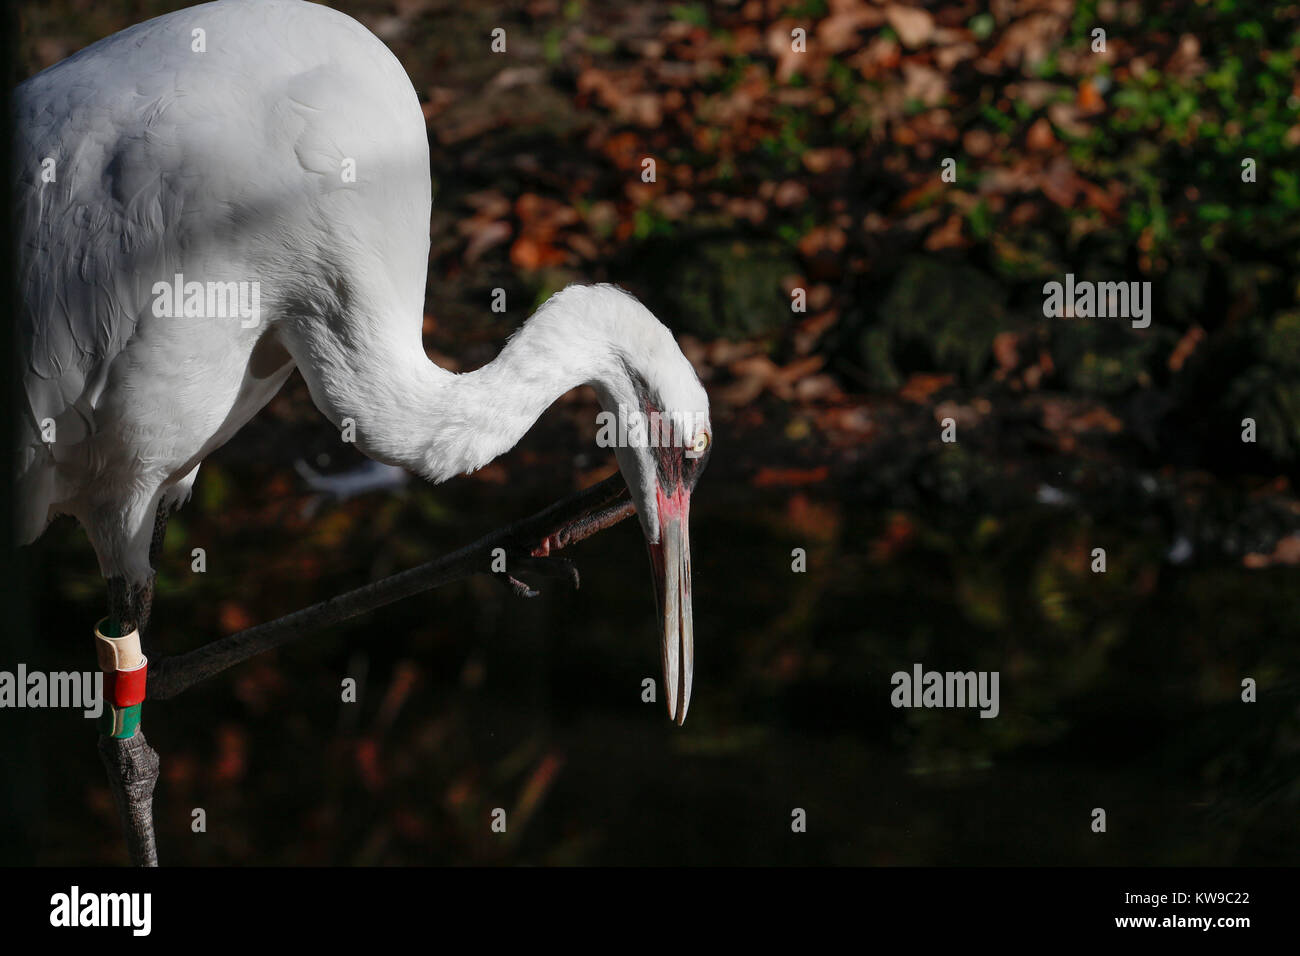 Whooping crane (Grus americana), an endangered species Stock Photo